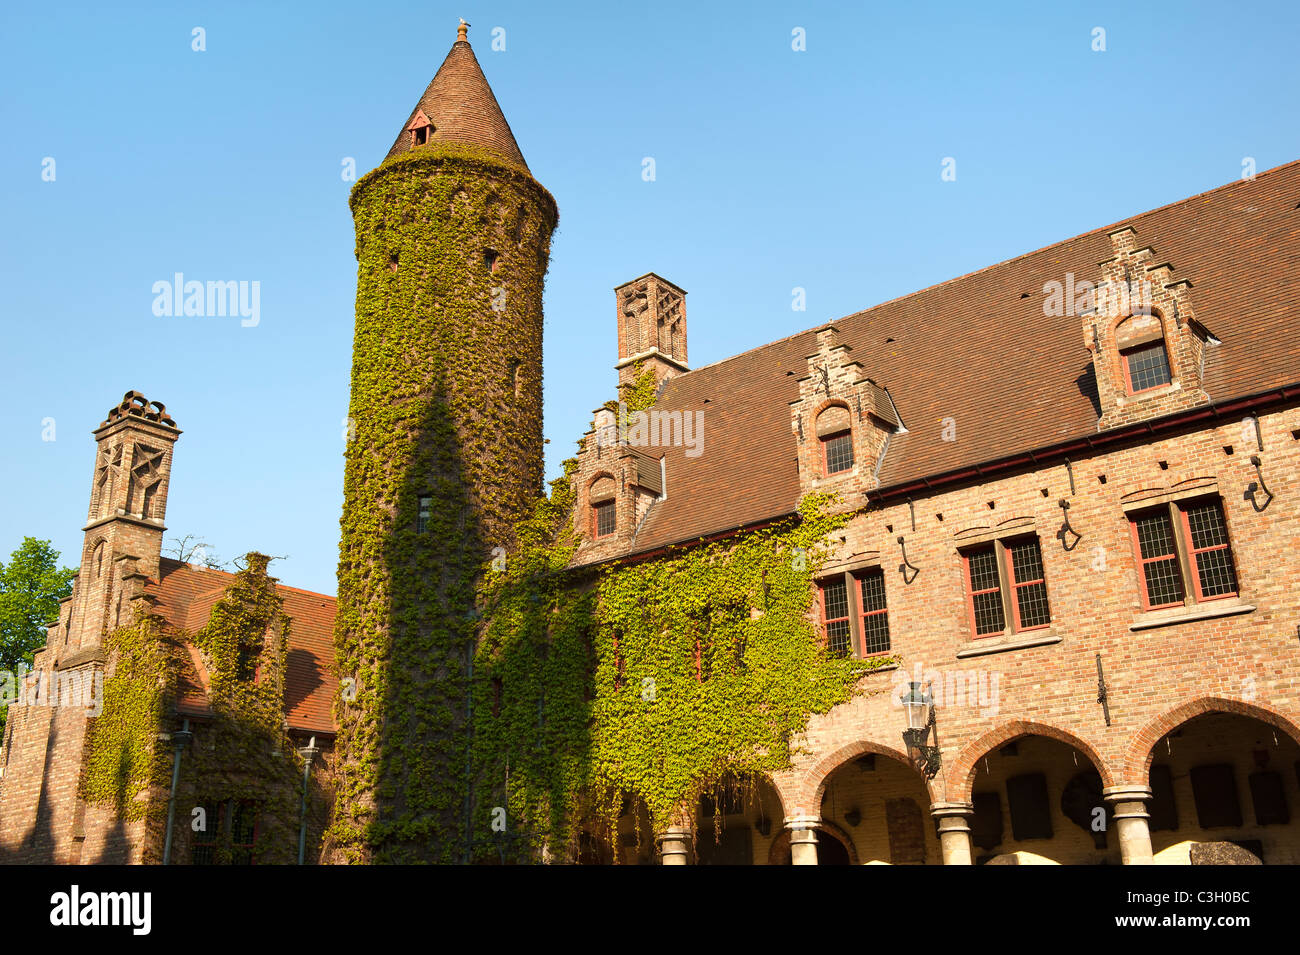 Gruuthuse museum, Courtyard, Historic centre of Bruges, Belgium Stock Photo